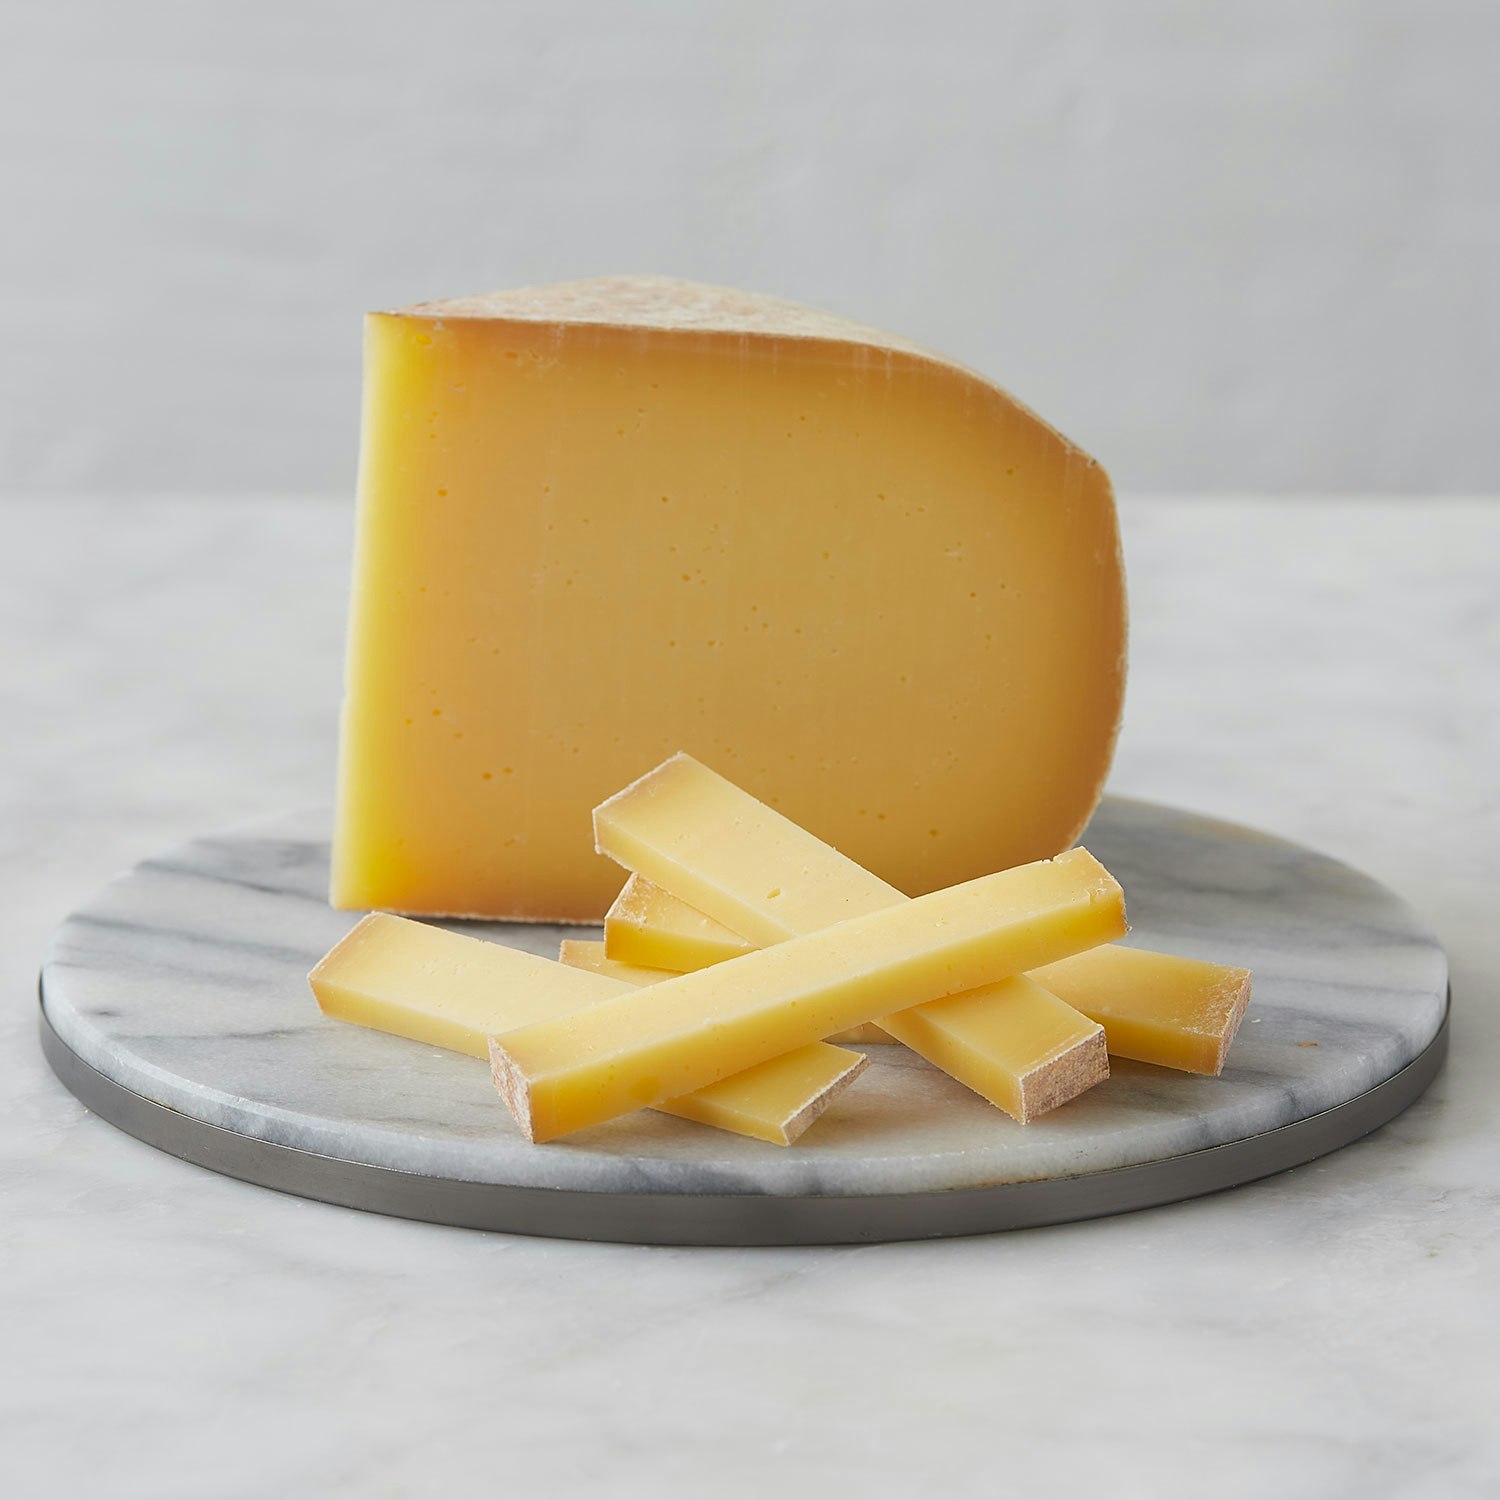 uplands cheese company pleasant ridge reserve extra aged cheese